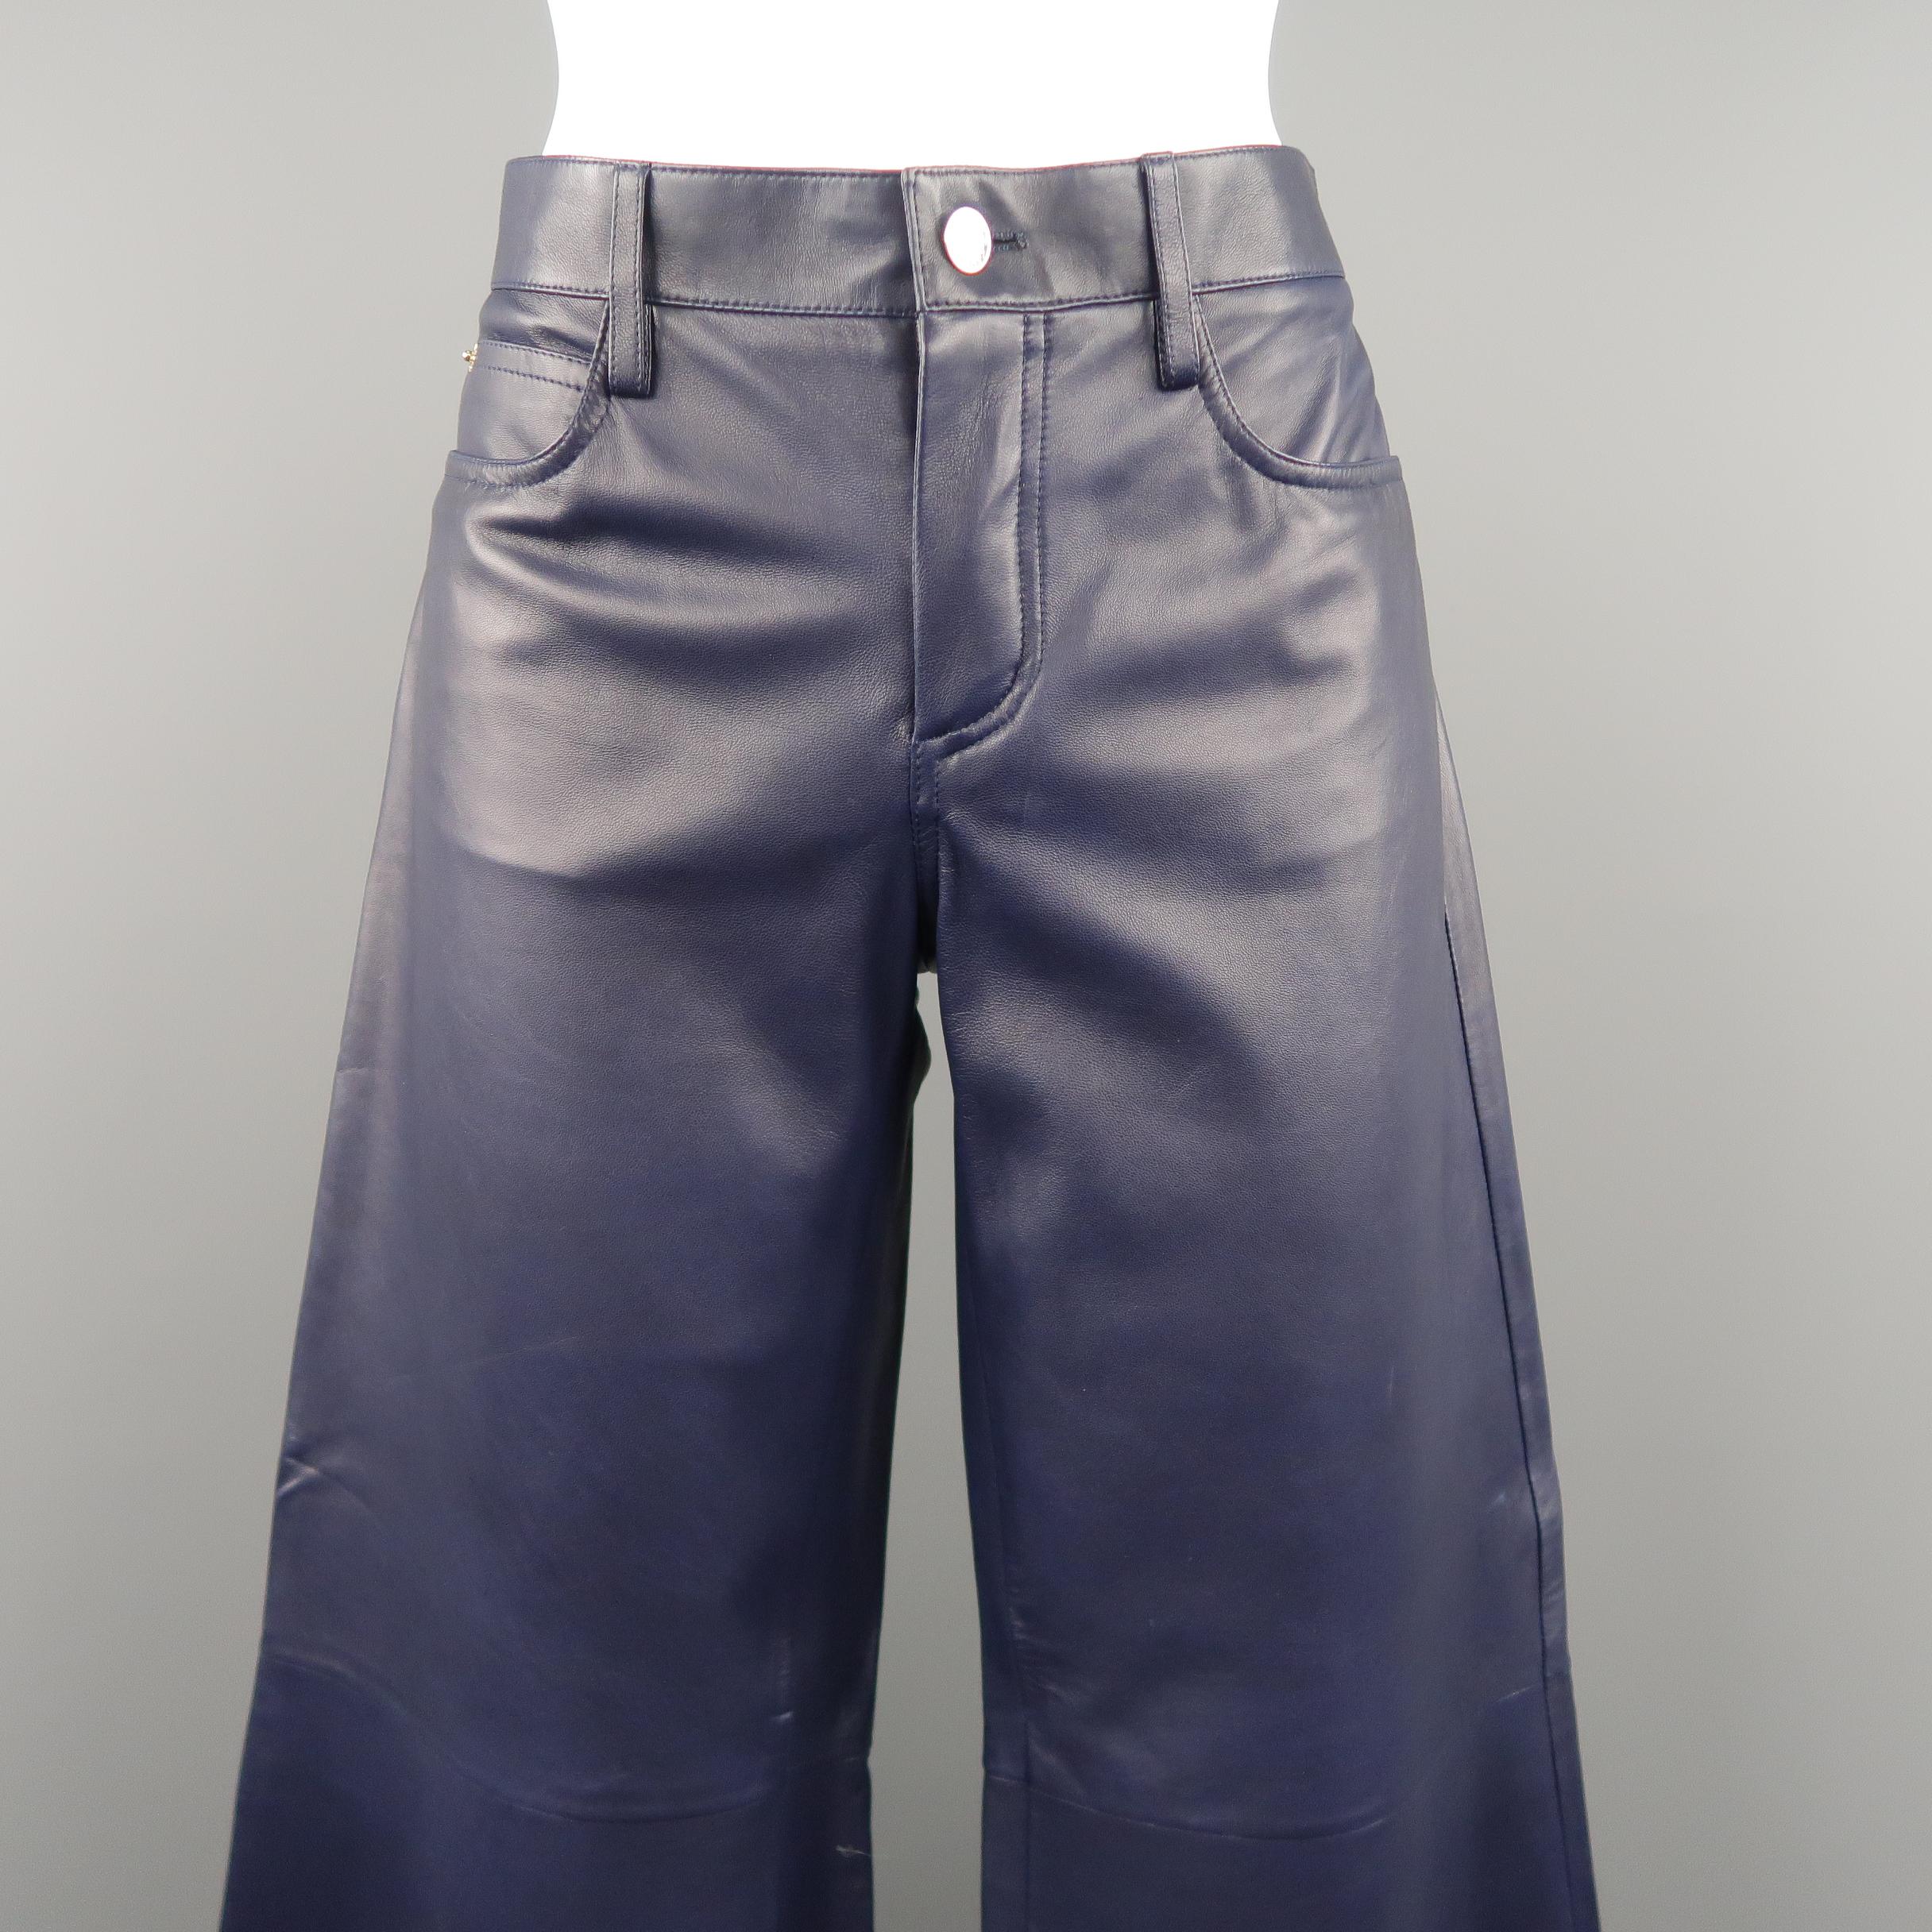 RALPH LAUREN COLLECTION pants come in smooth, supple navy blue lambskin leather with a classic five pocket denim style and wide bell bottom legs. Made in Italy.  Retails - $2450
 
Excellent Pre-Owned Condition.
Marked:
 
Measurements:
 
Waist: 31